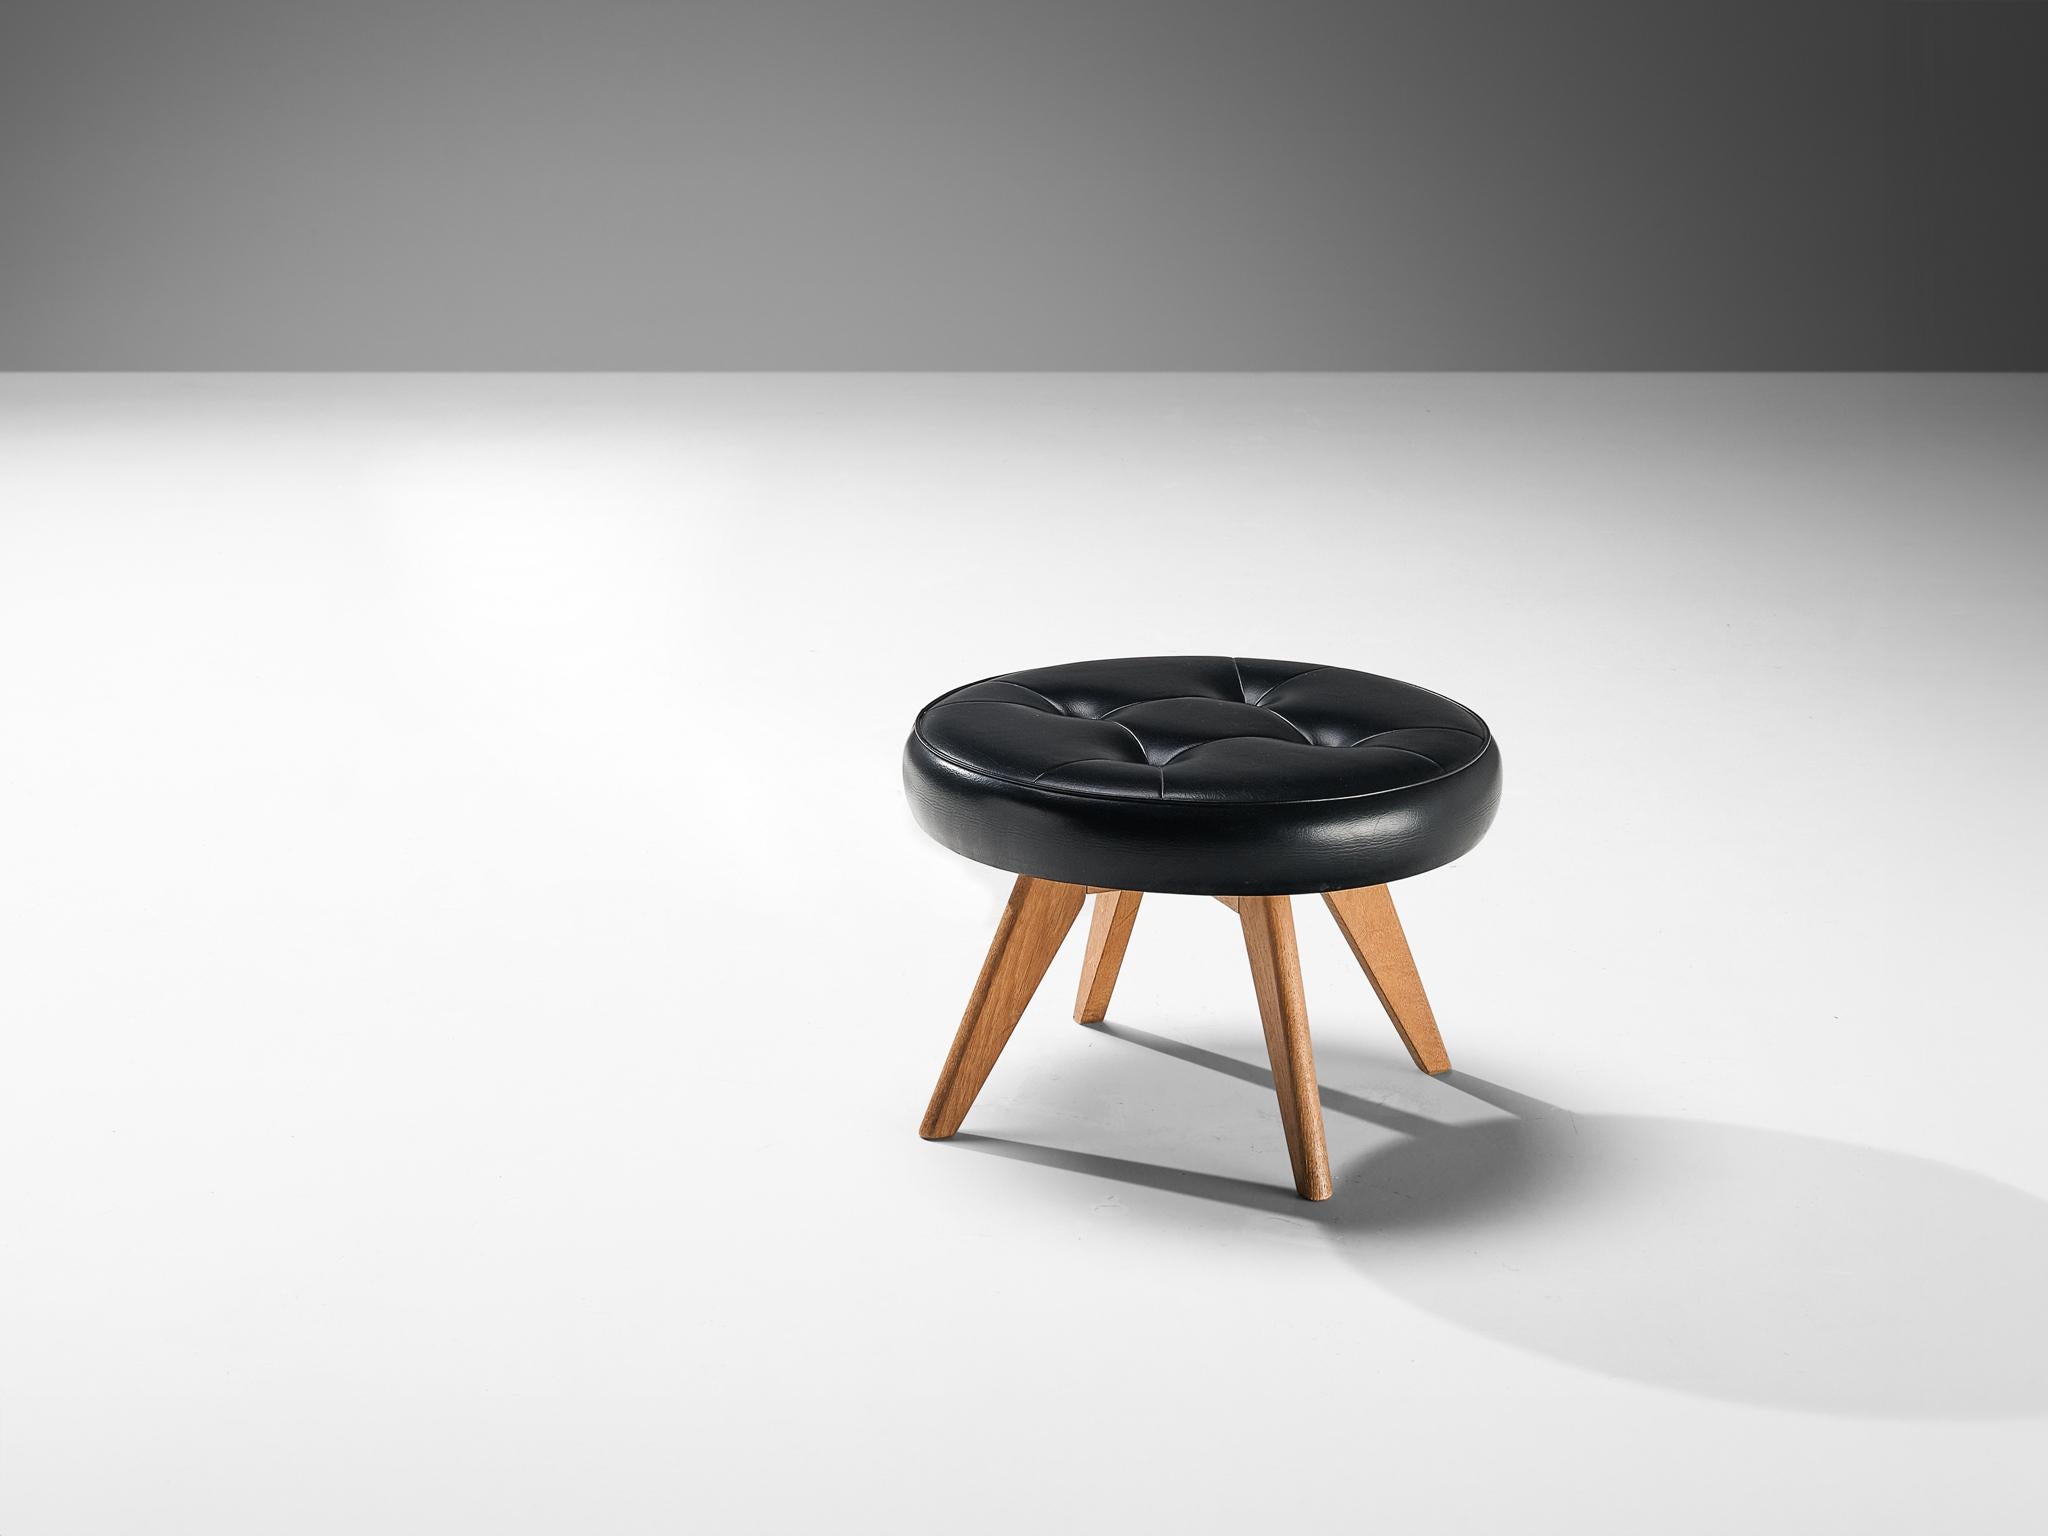 Stool, teak, leatherette, Denmark, 1960s

A sleek stool made in Denmark in the 1960s. This midcentury modern design is a wonderful addition to any interior, due to its minimalist aesthetic. The stool is equipped with a round, tufted cushion,